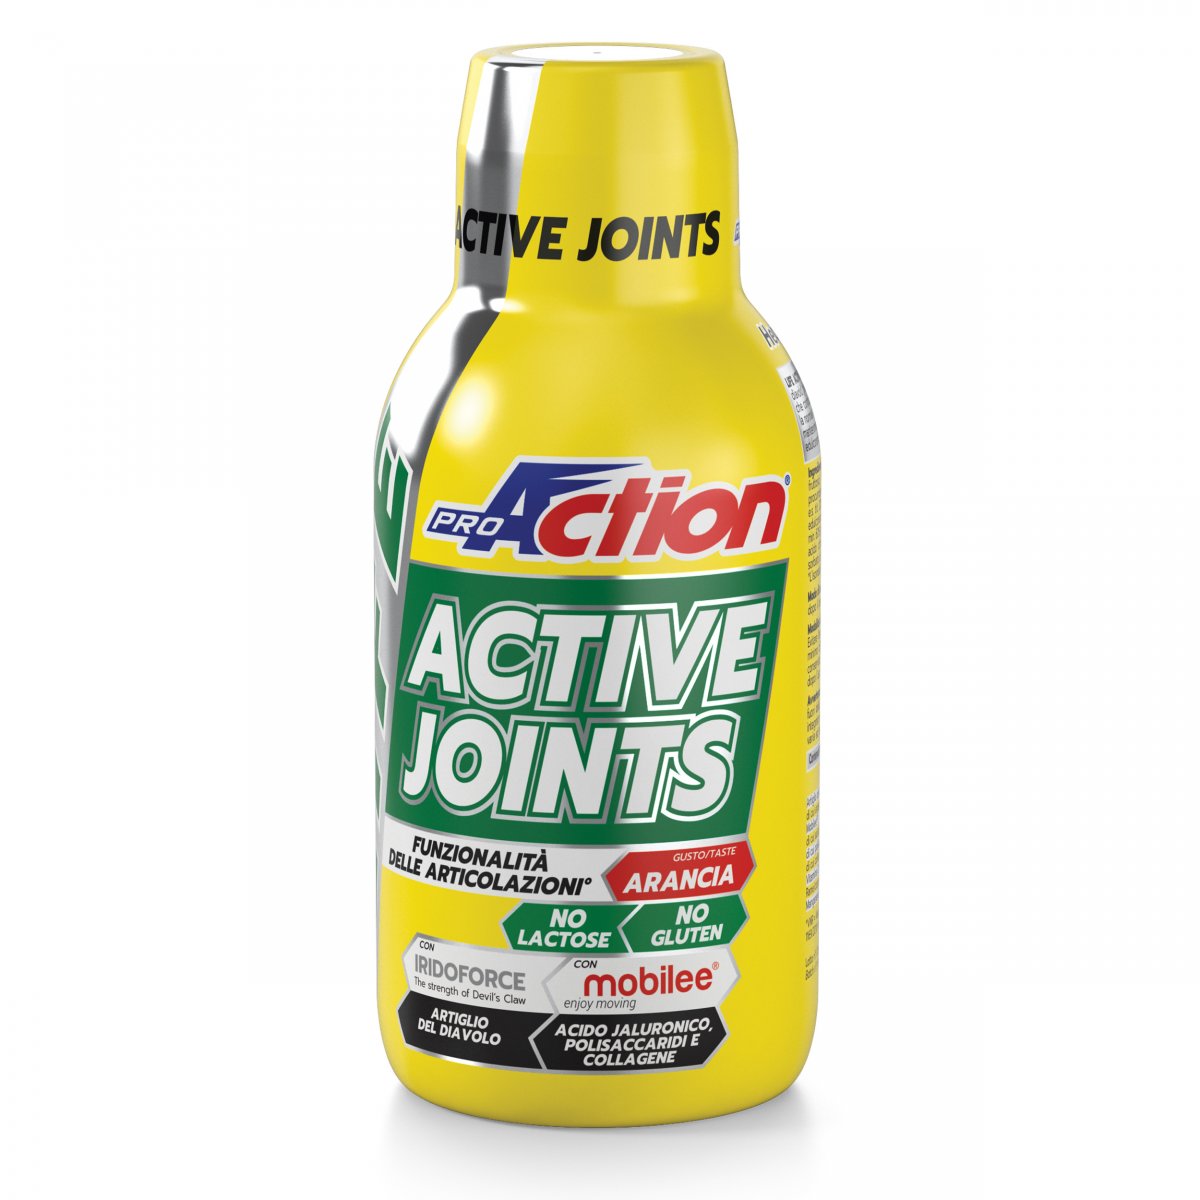 Active Joints